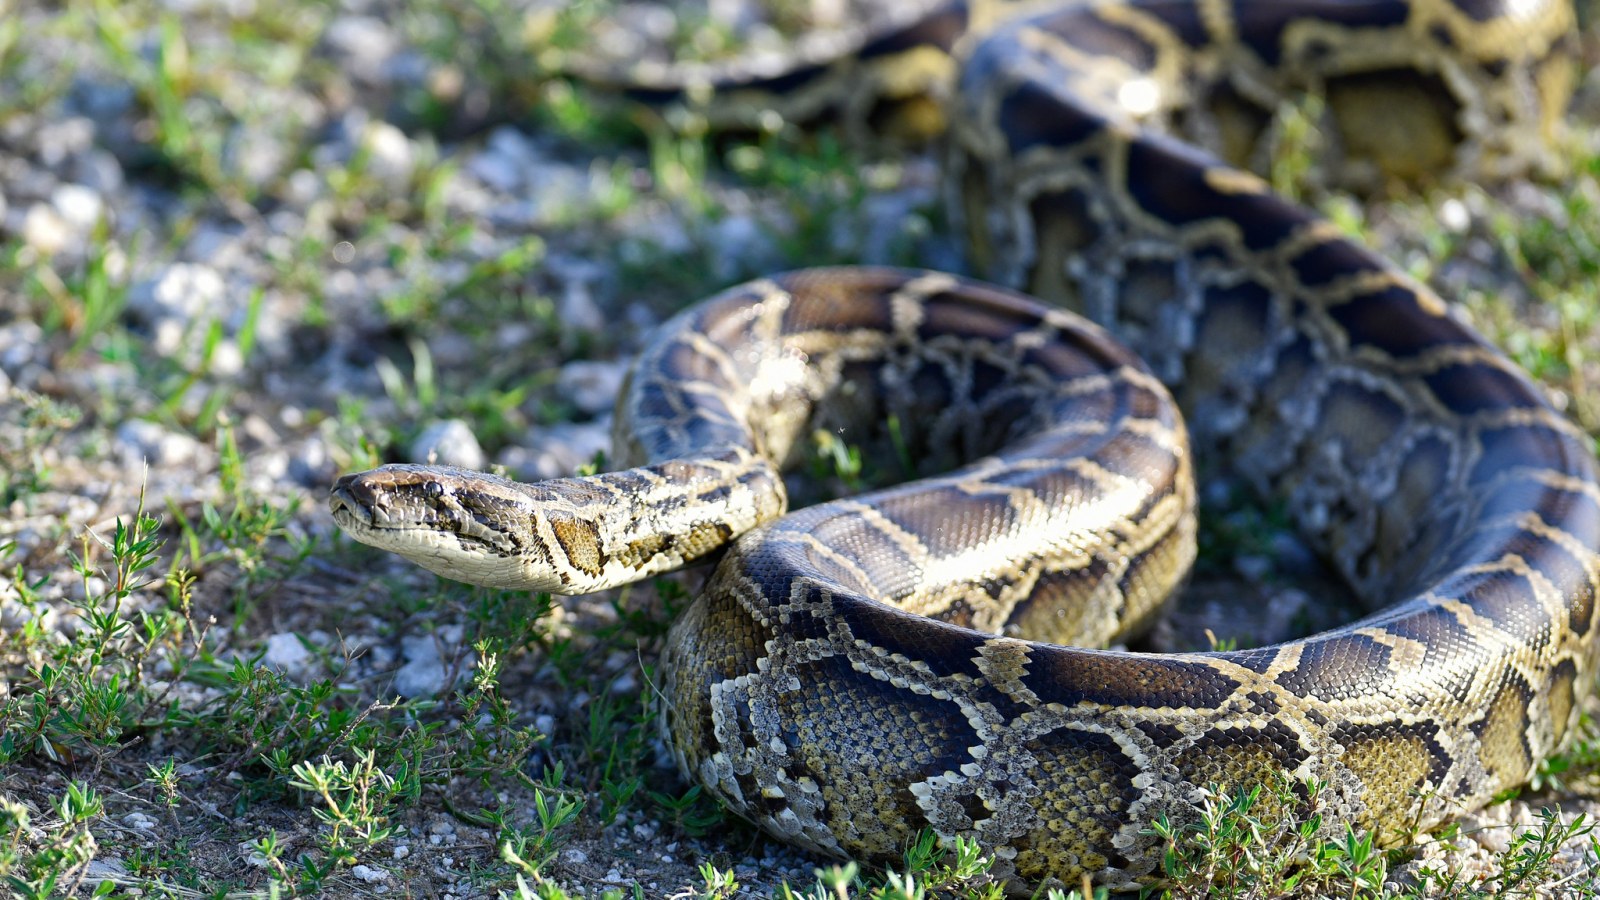 How is the Burmese Python Impacting the Everglades Ecosystem?